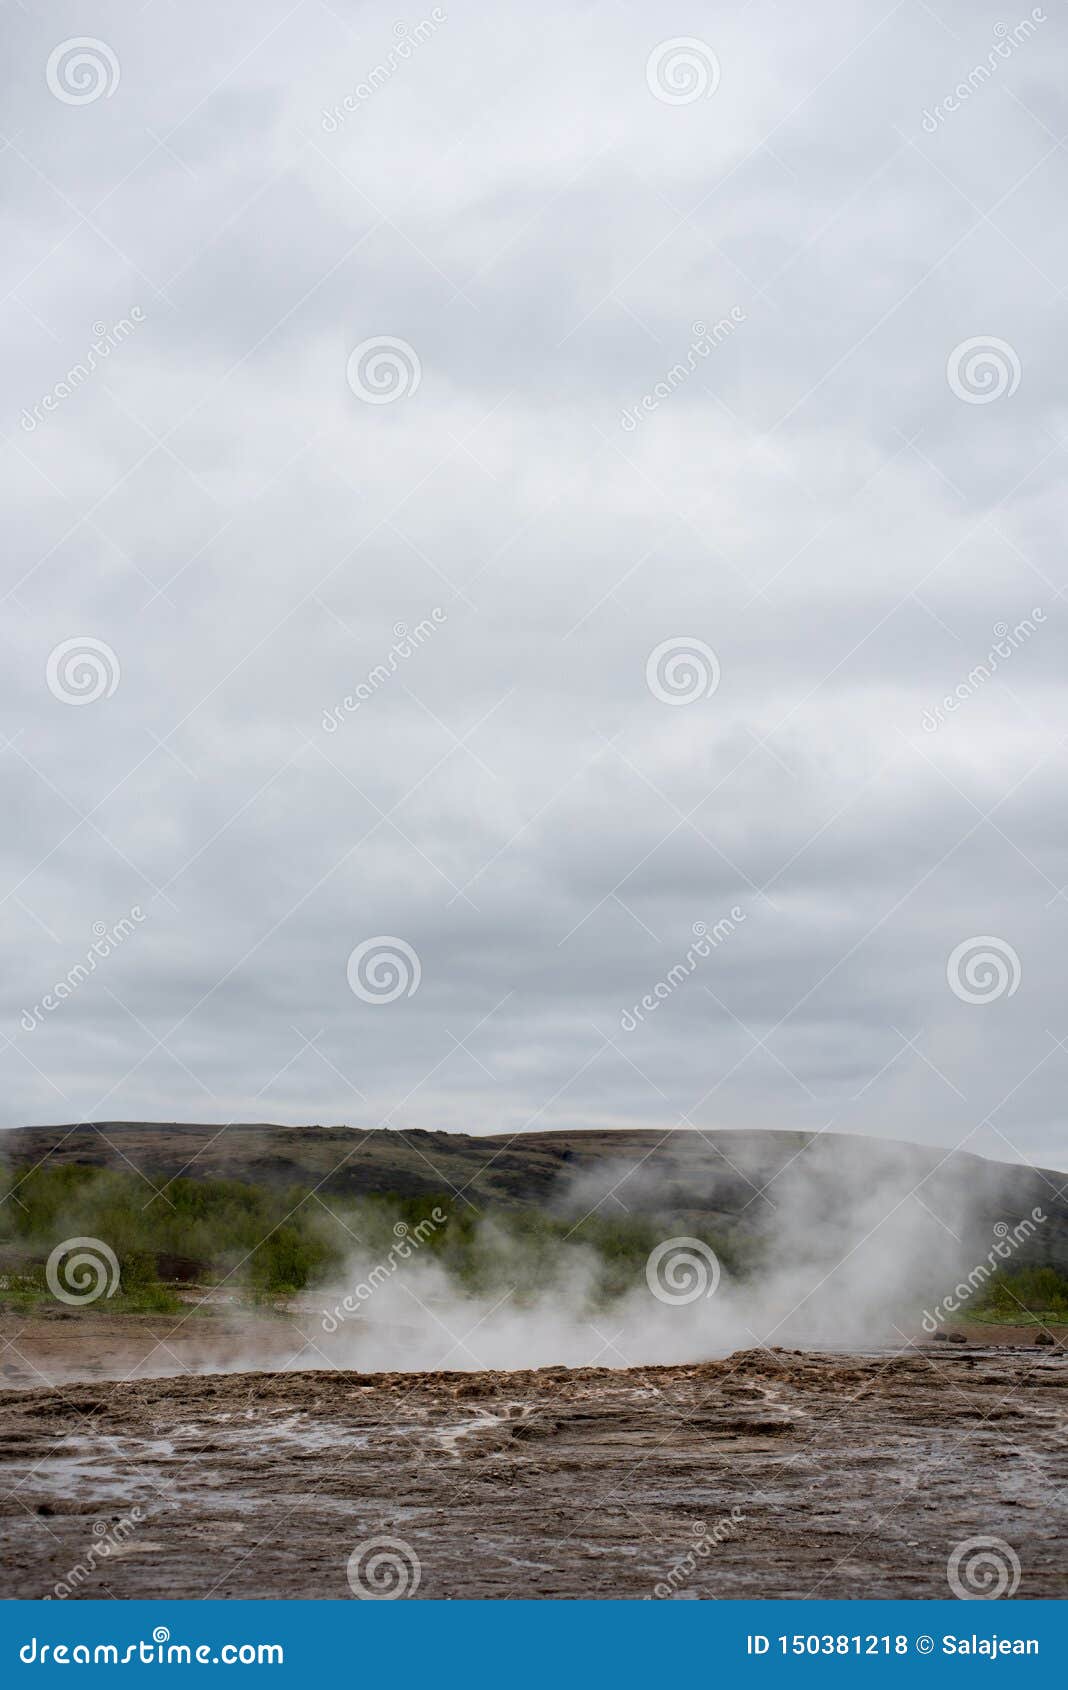 geothermal activity in hveragerdi, iceland with hot springs